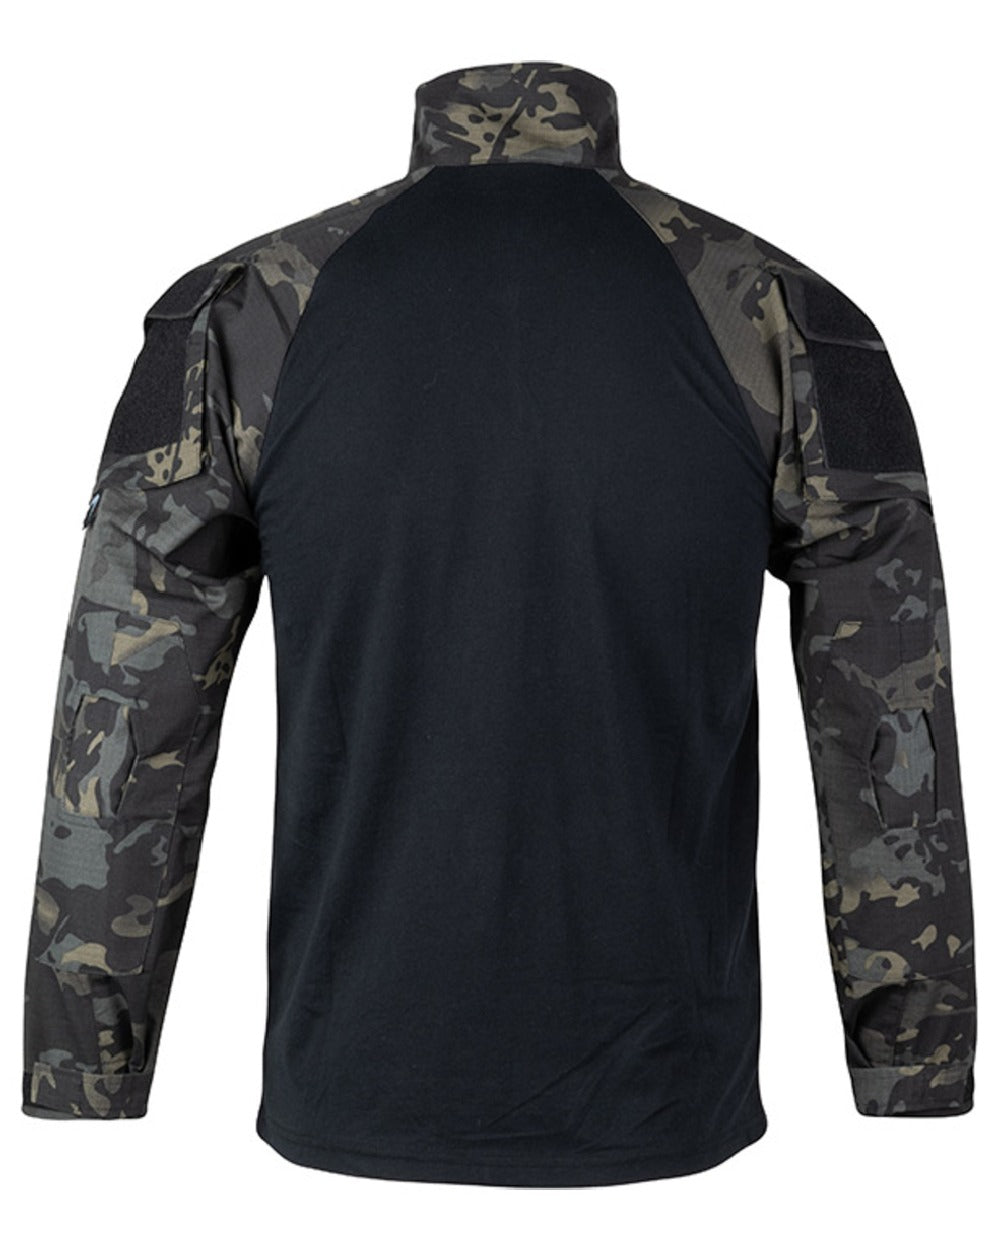 Viper Special Ops Shirt in VCAM Black 